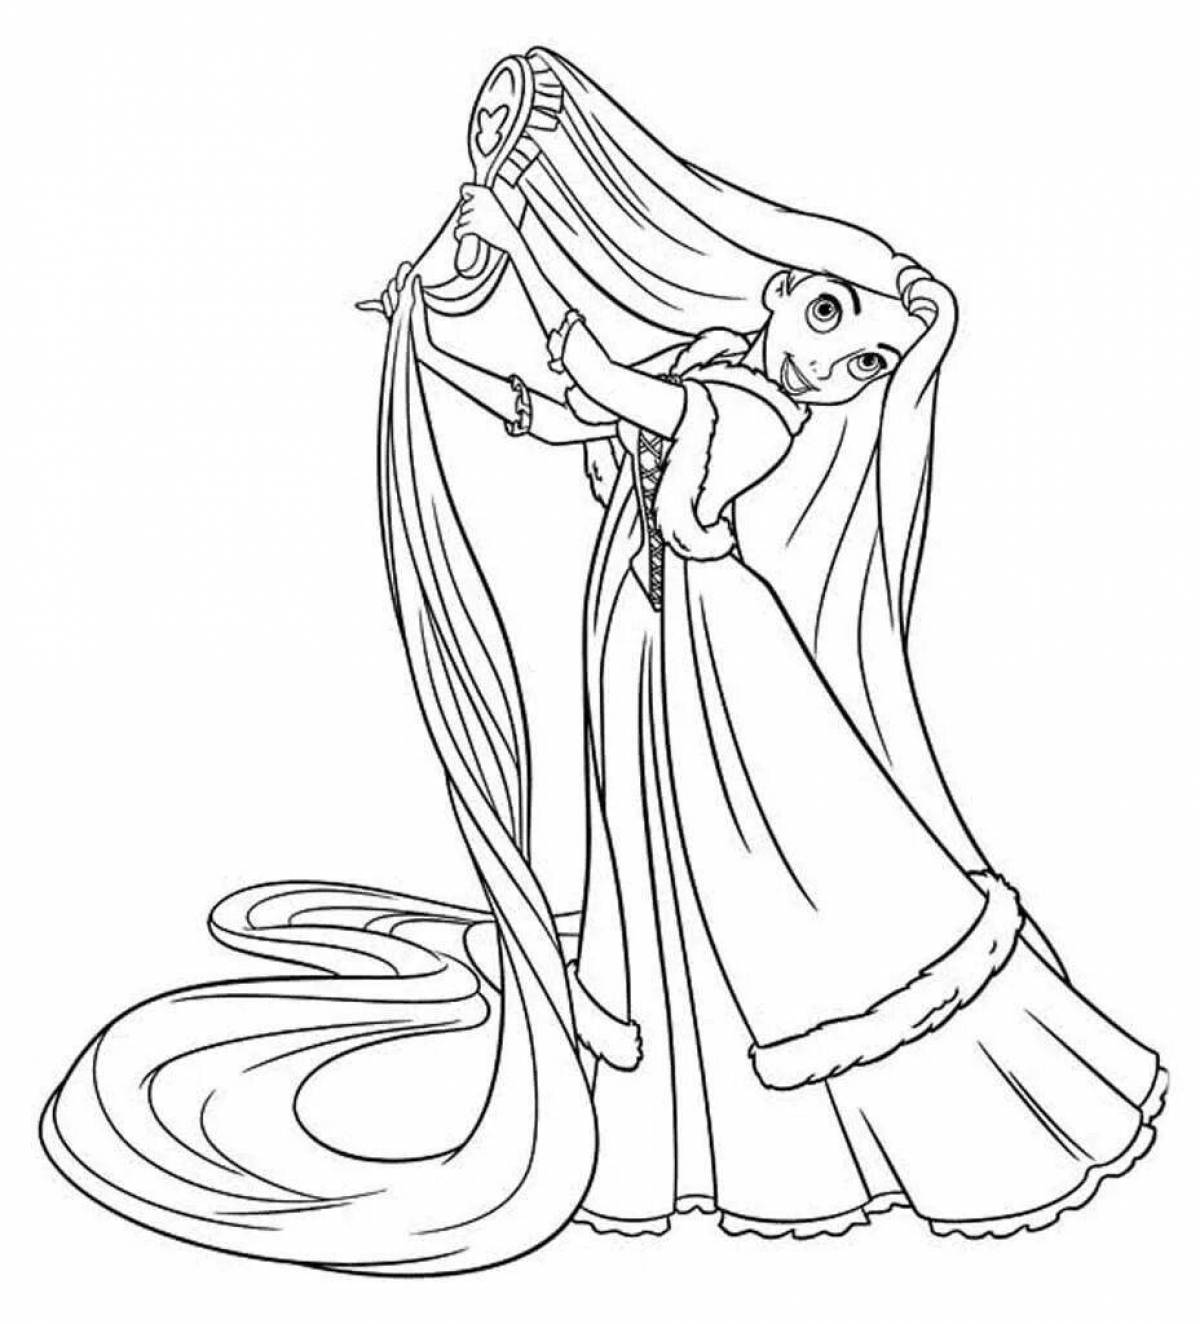 Coloring page dazzlingly long-haired princess